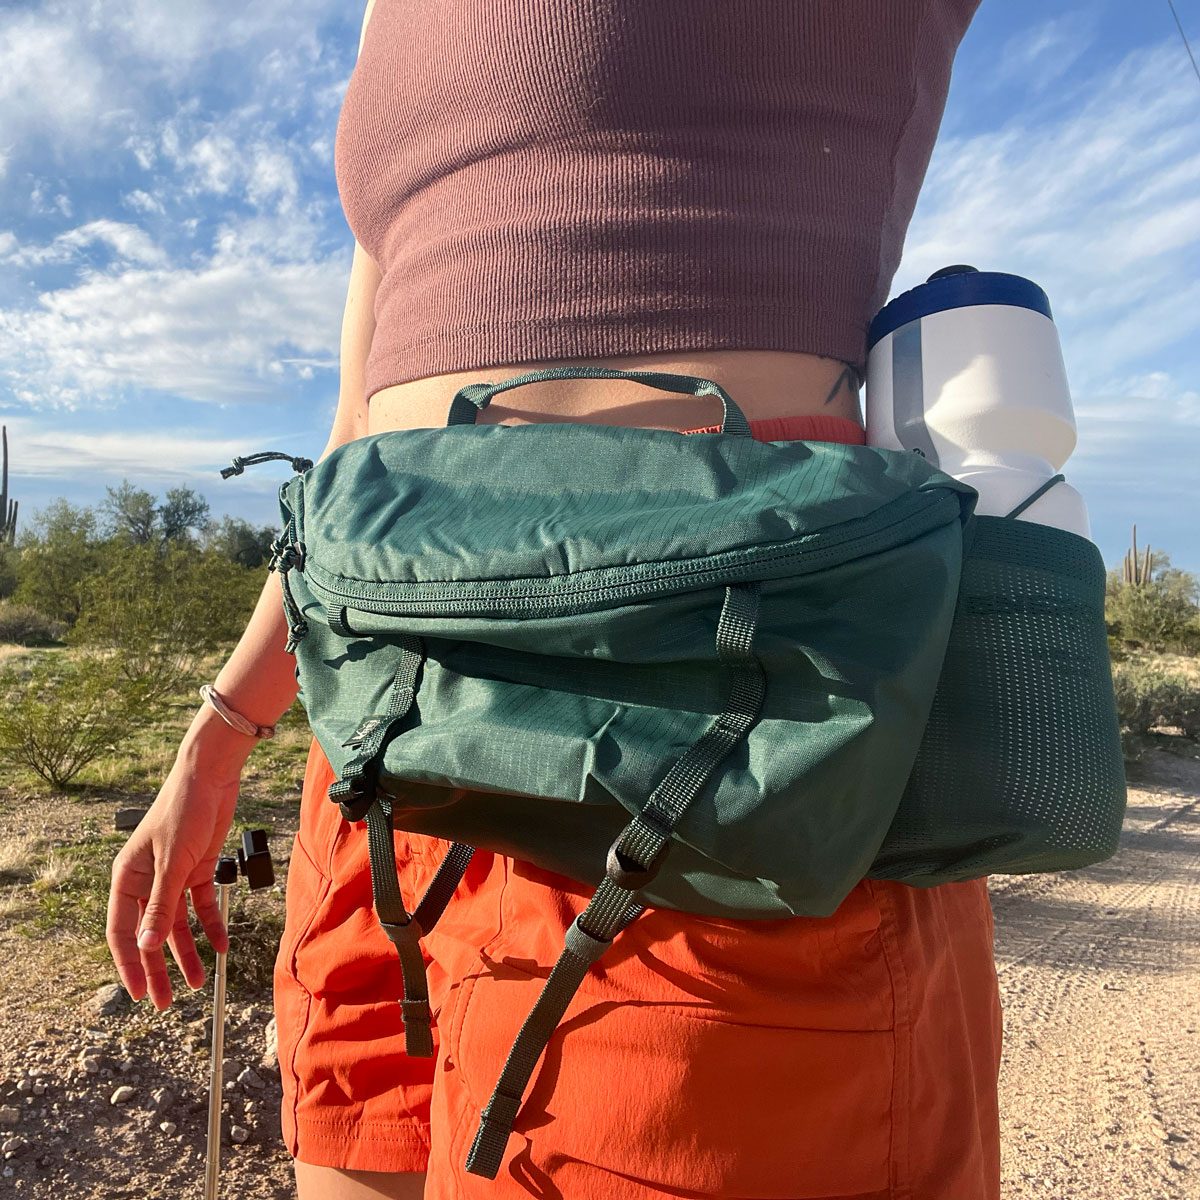 Adorable Hiking Gear for Your Tiny Adventurer